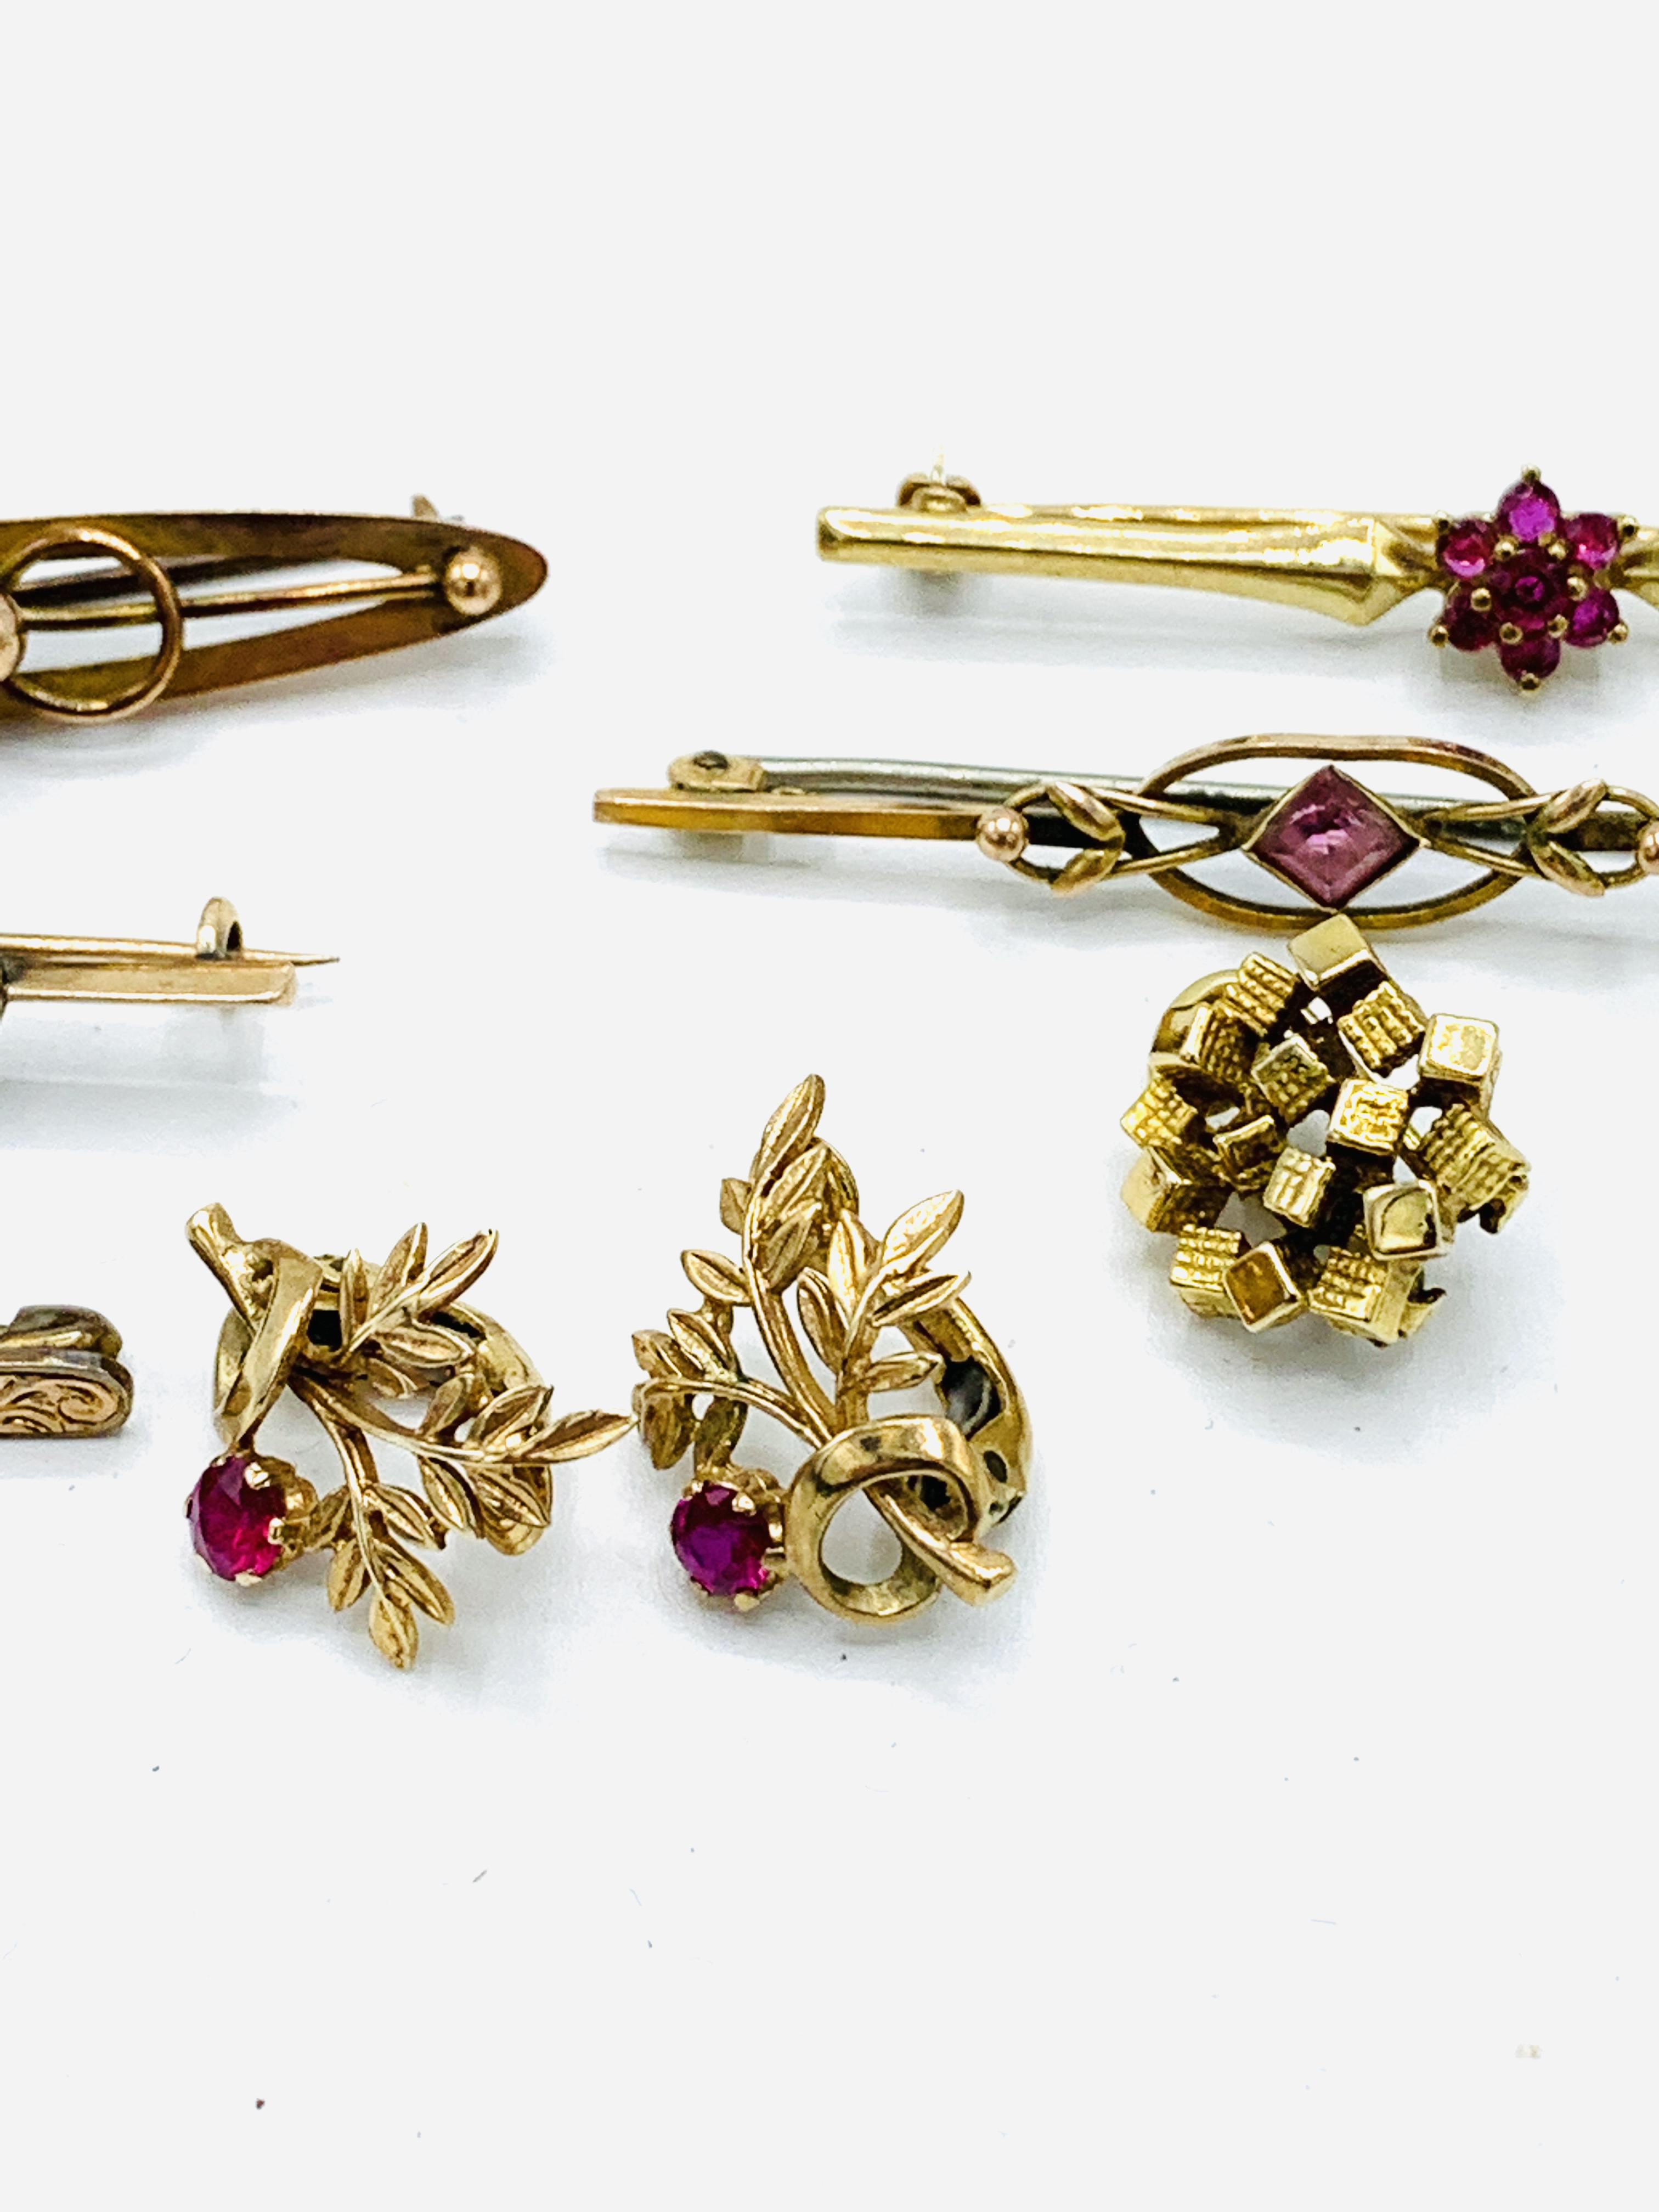 Four 9ct gold bar brooches, another bar brooch; and three 9ct earrings - Image 4 of 4